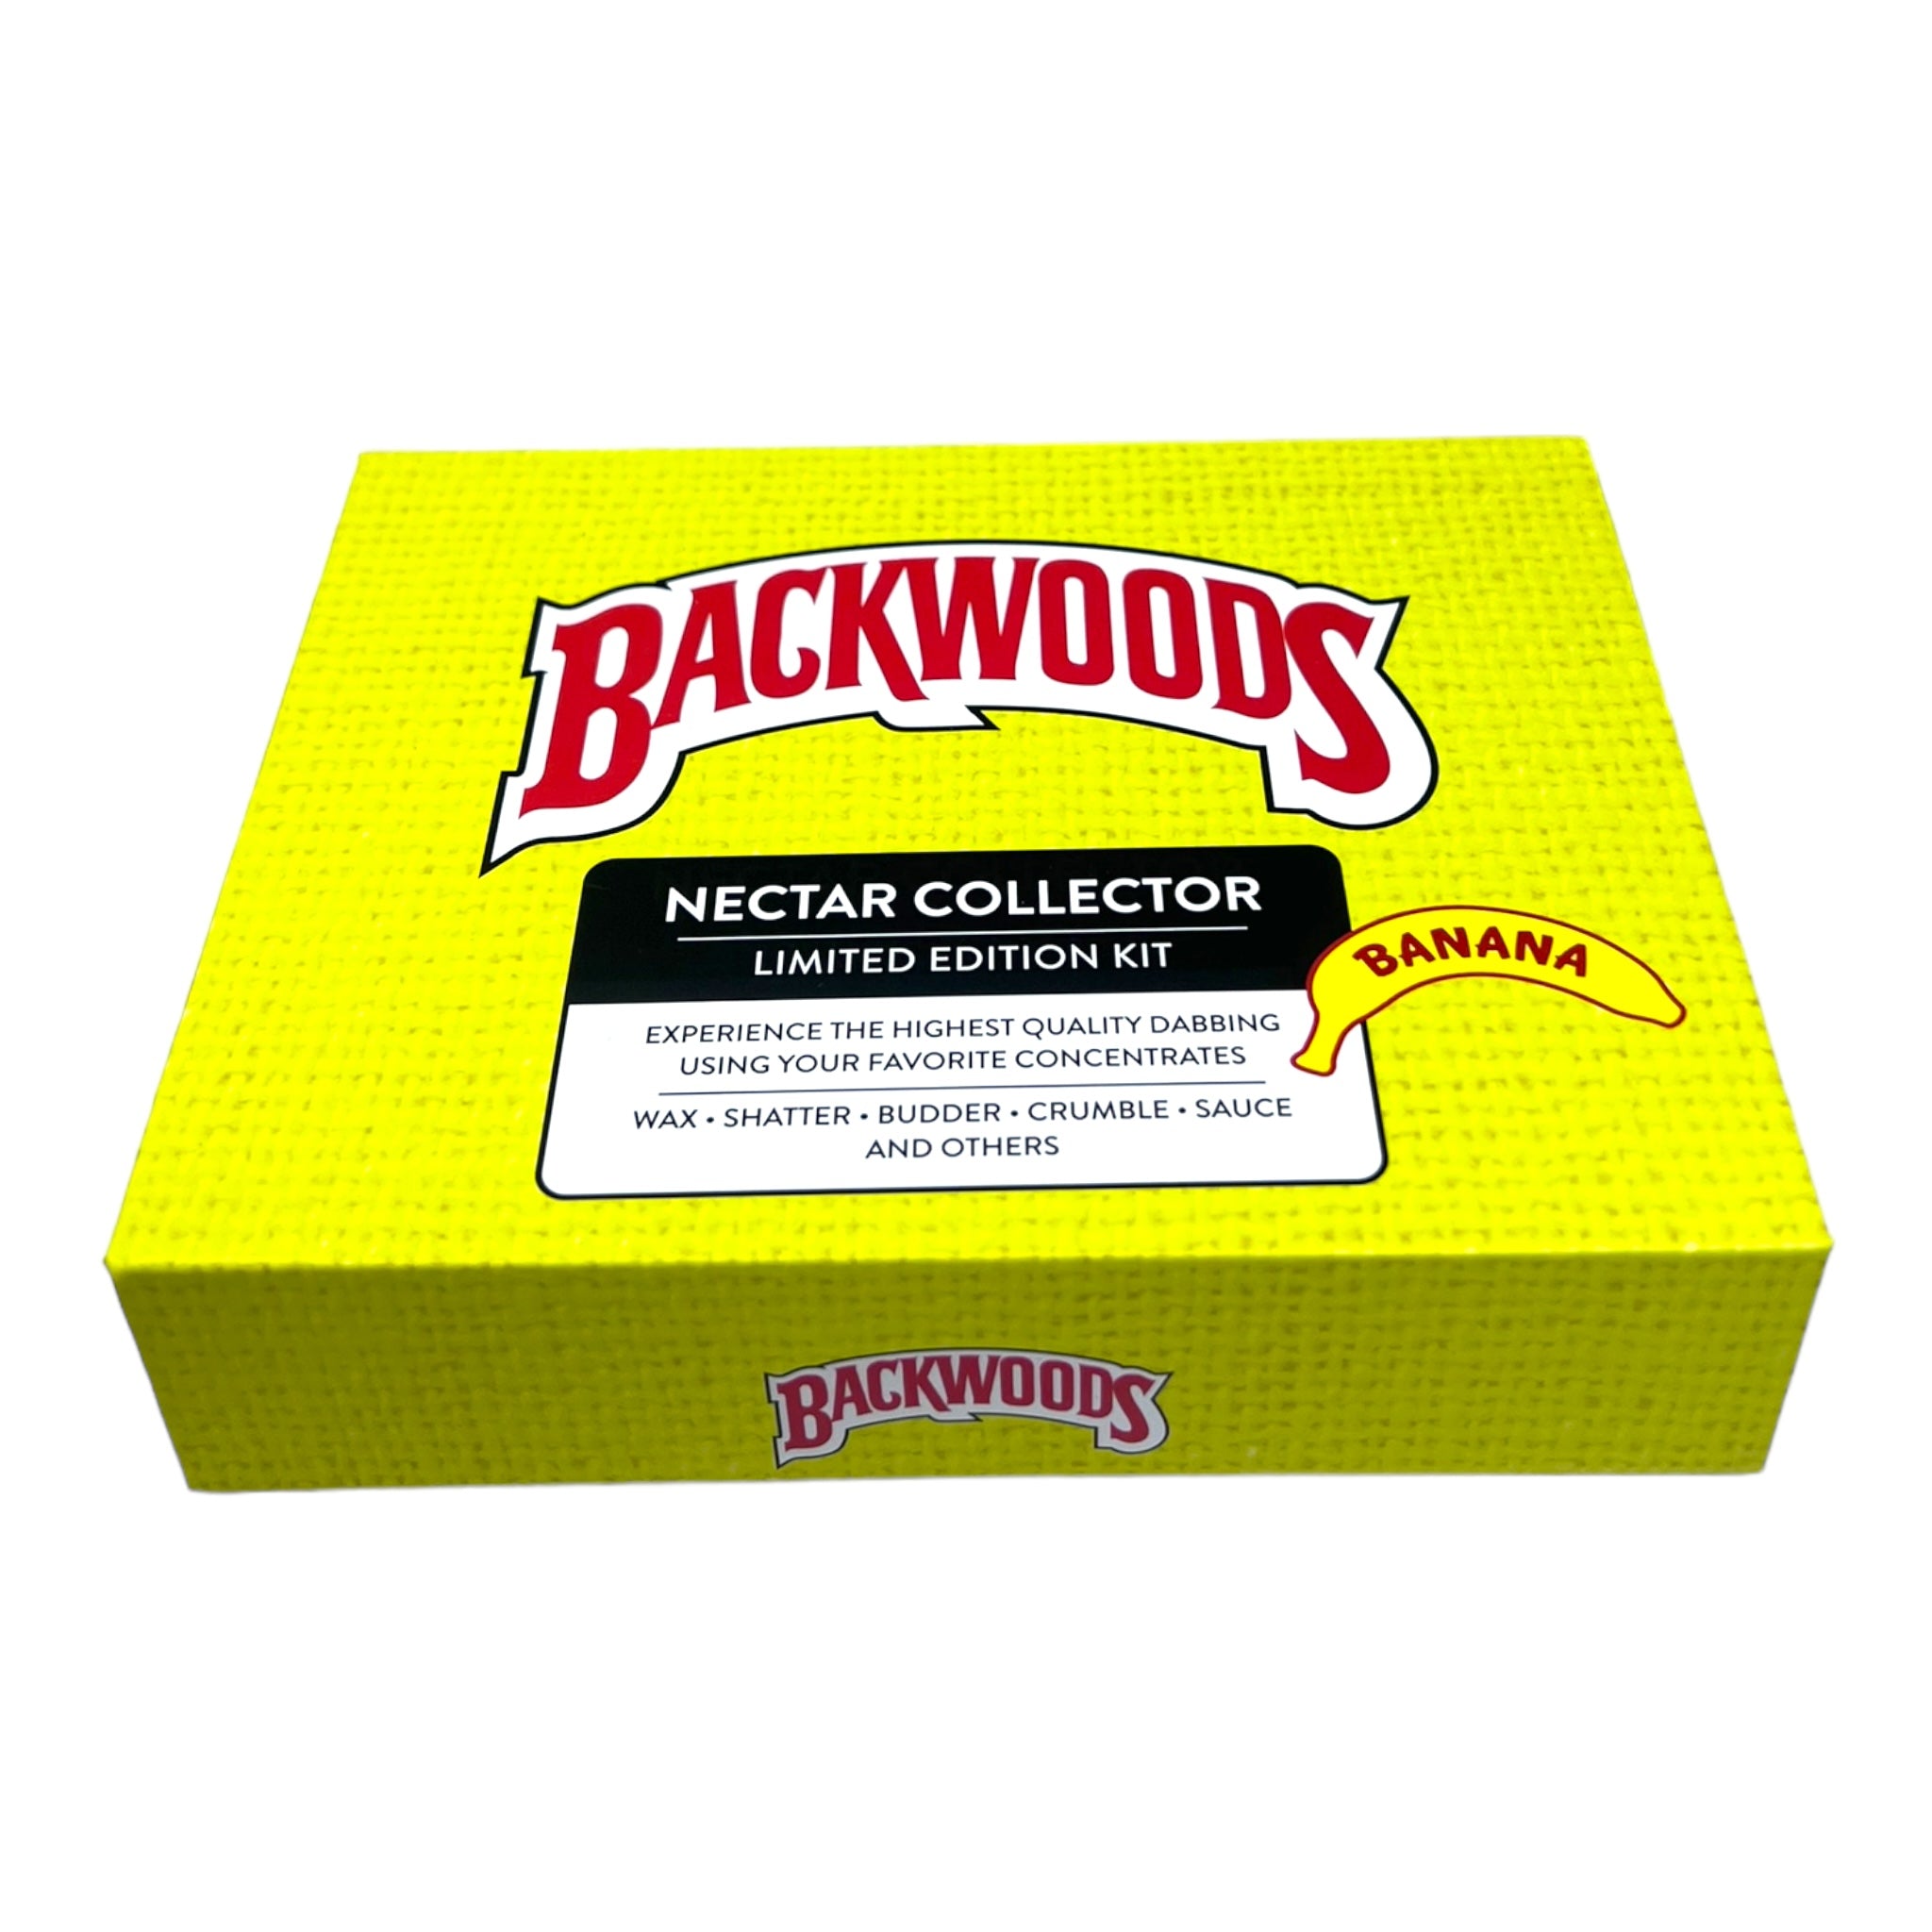 Backwoods Nectar Collector Kit